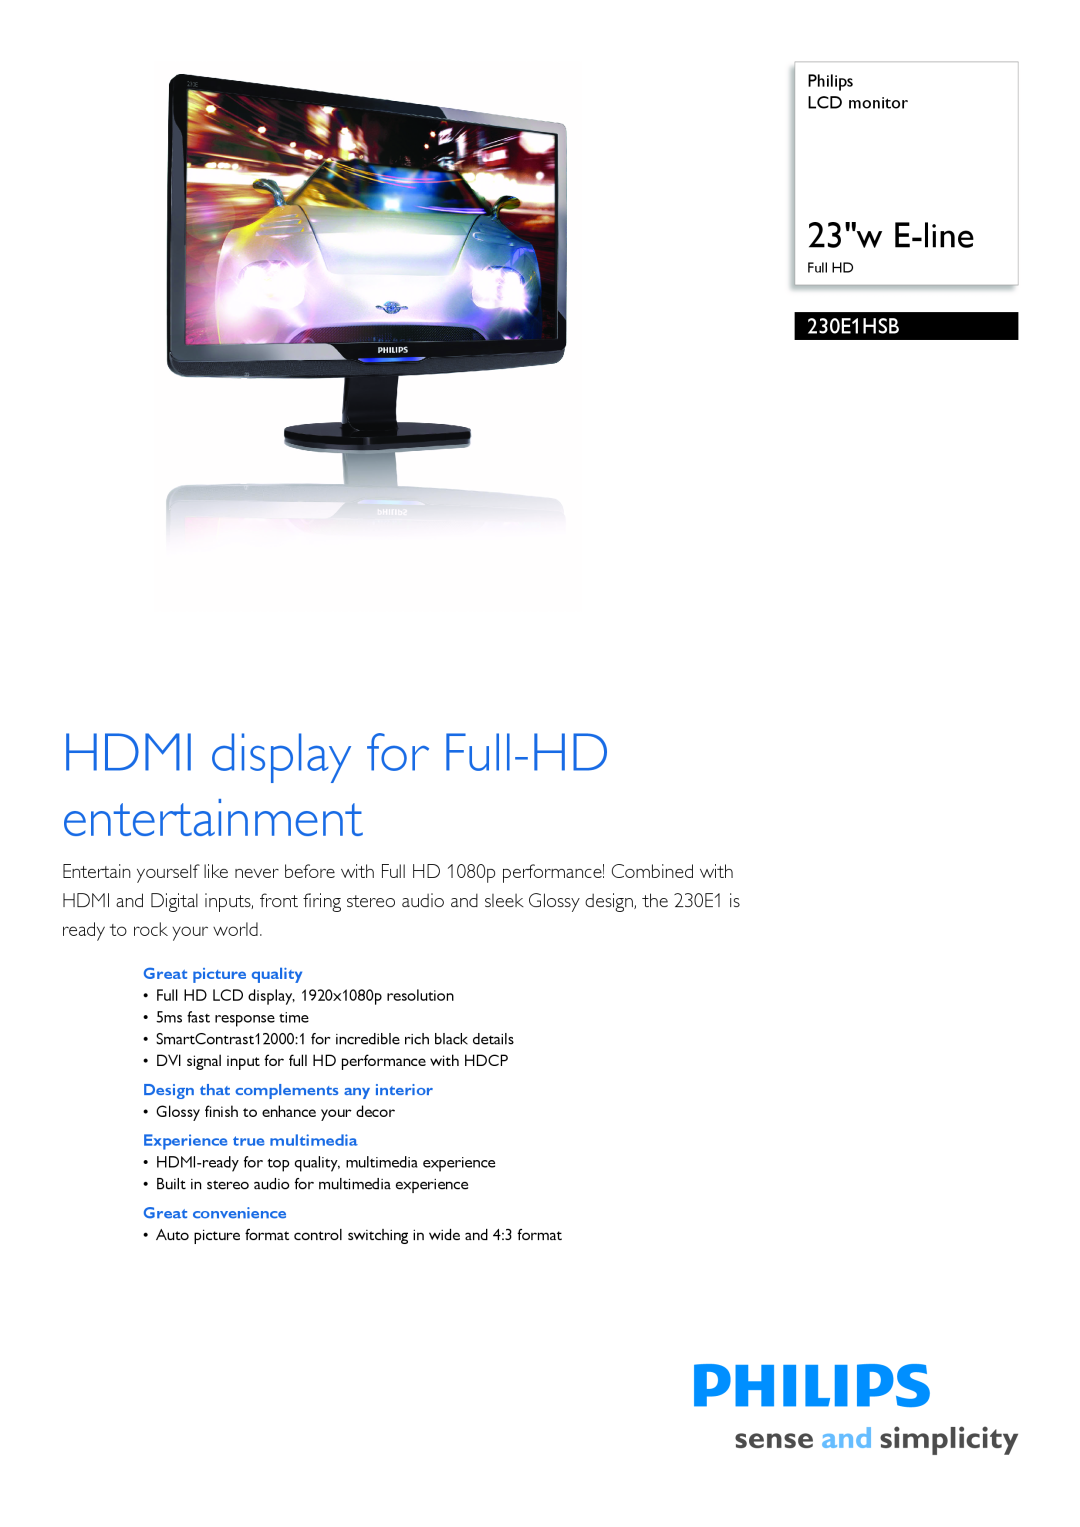 Philips 230E1HSB/97 manual Philips LCD monitor, Great picture quality, Design that complements any interior, 23w E-line 